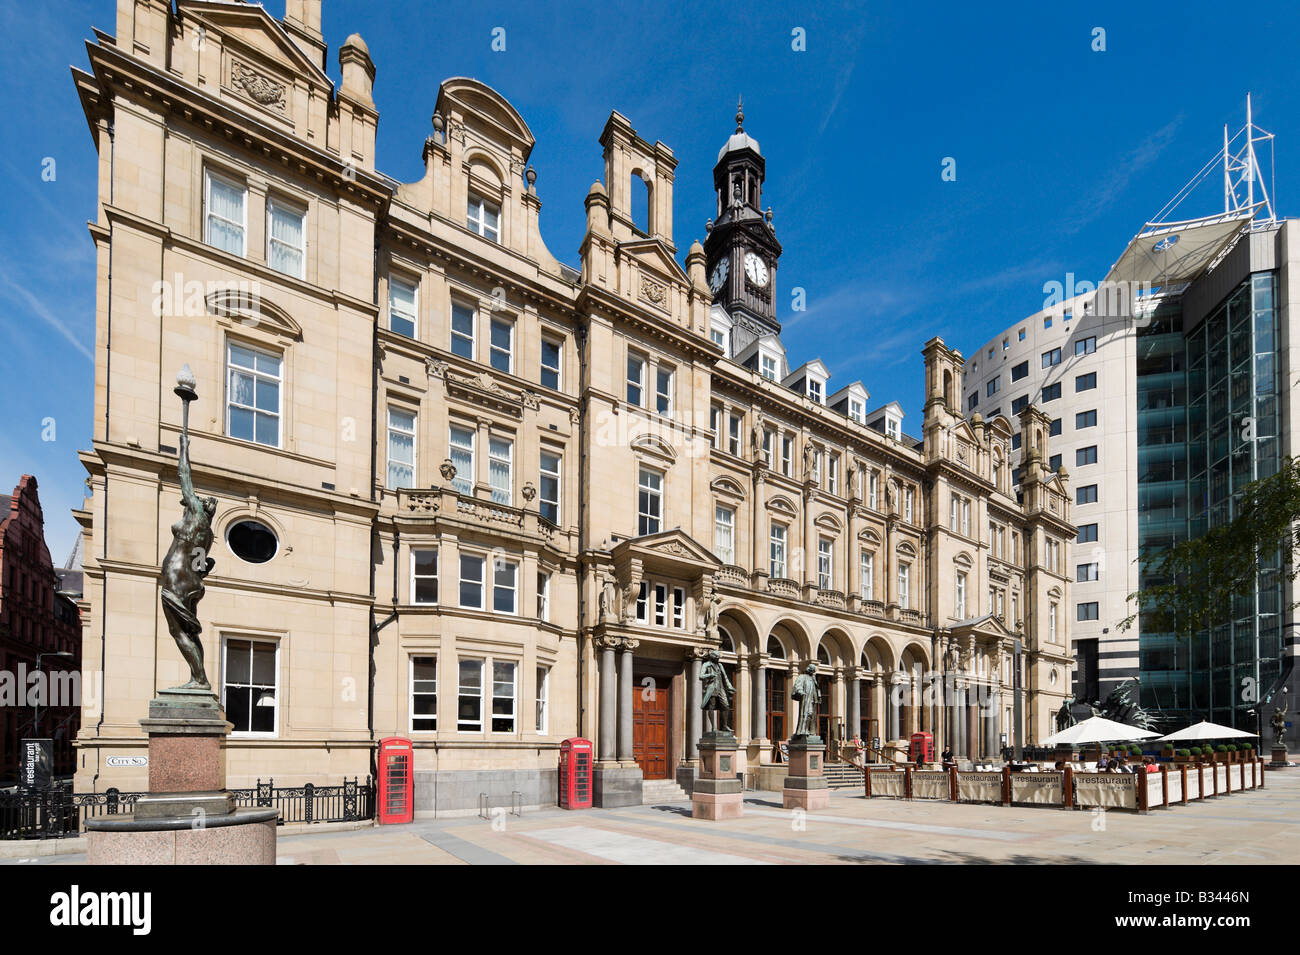 The Old Post Office containing The Restaurant Bar and Grill, City Square, Leeds, West Yorkshire, England Stock Photo